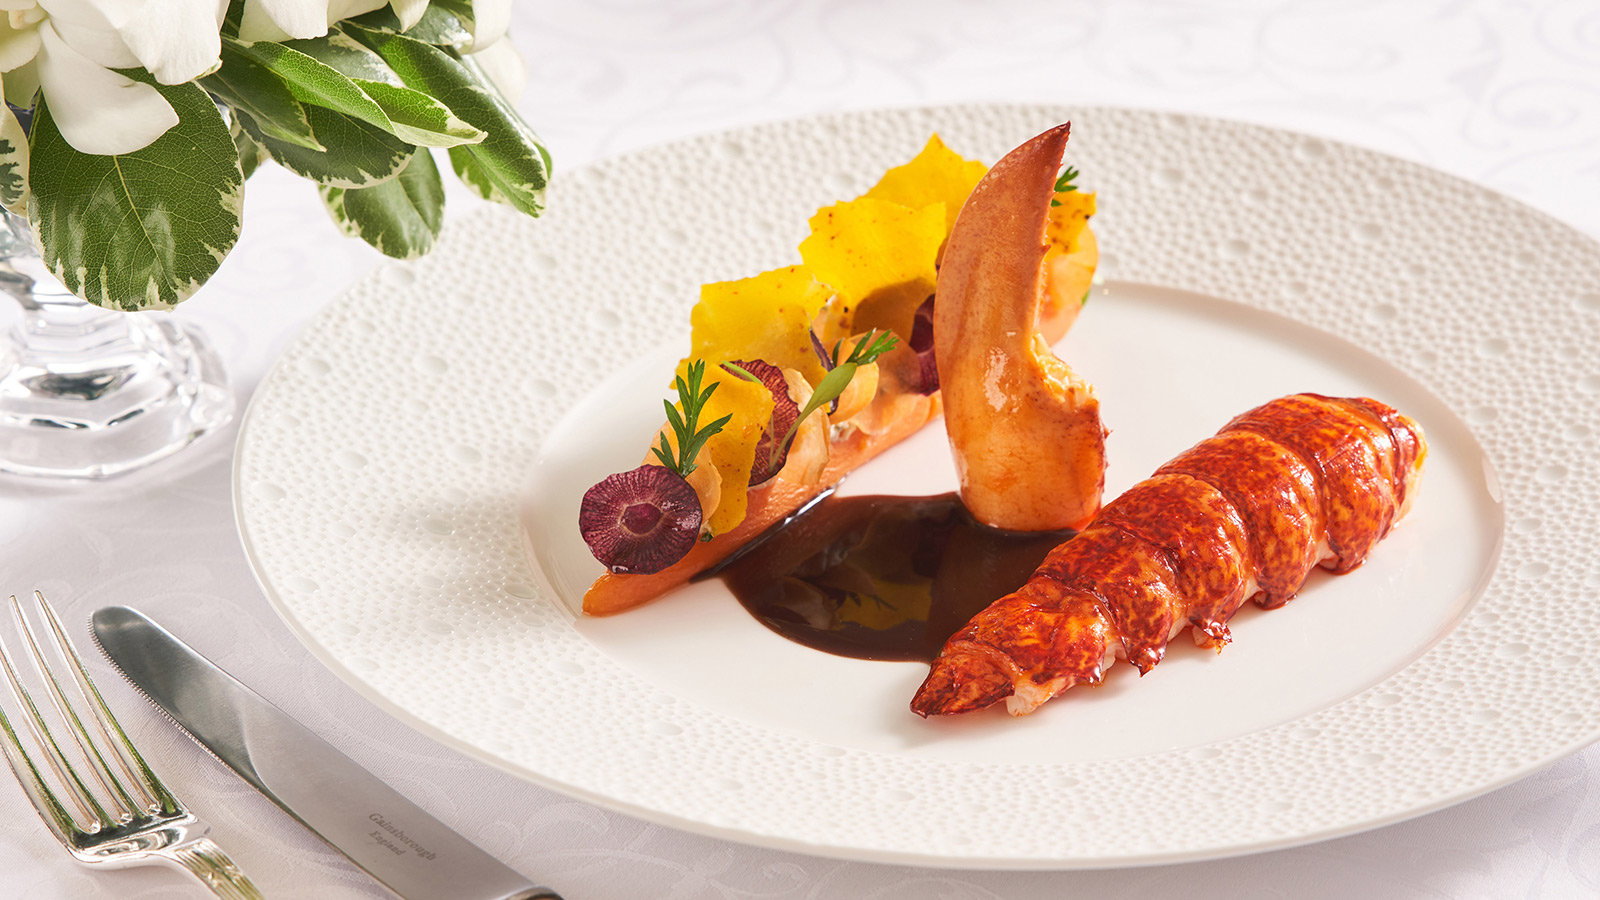 One-Michelin-starred Gaddi's signature poached lobster with red wine sauce, carrots and smoked ricotta